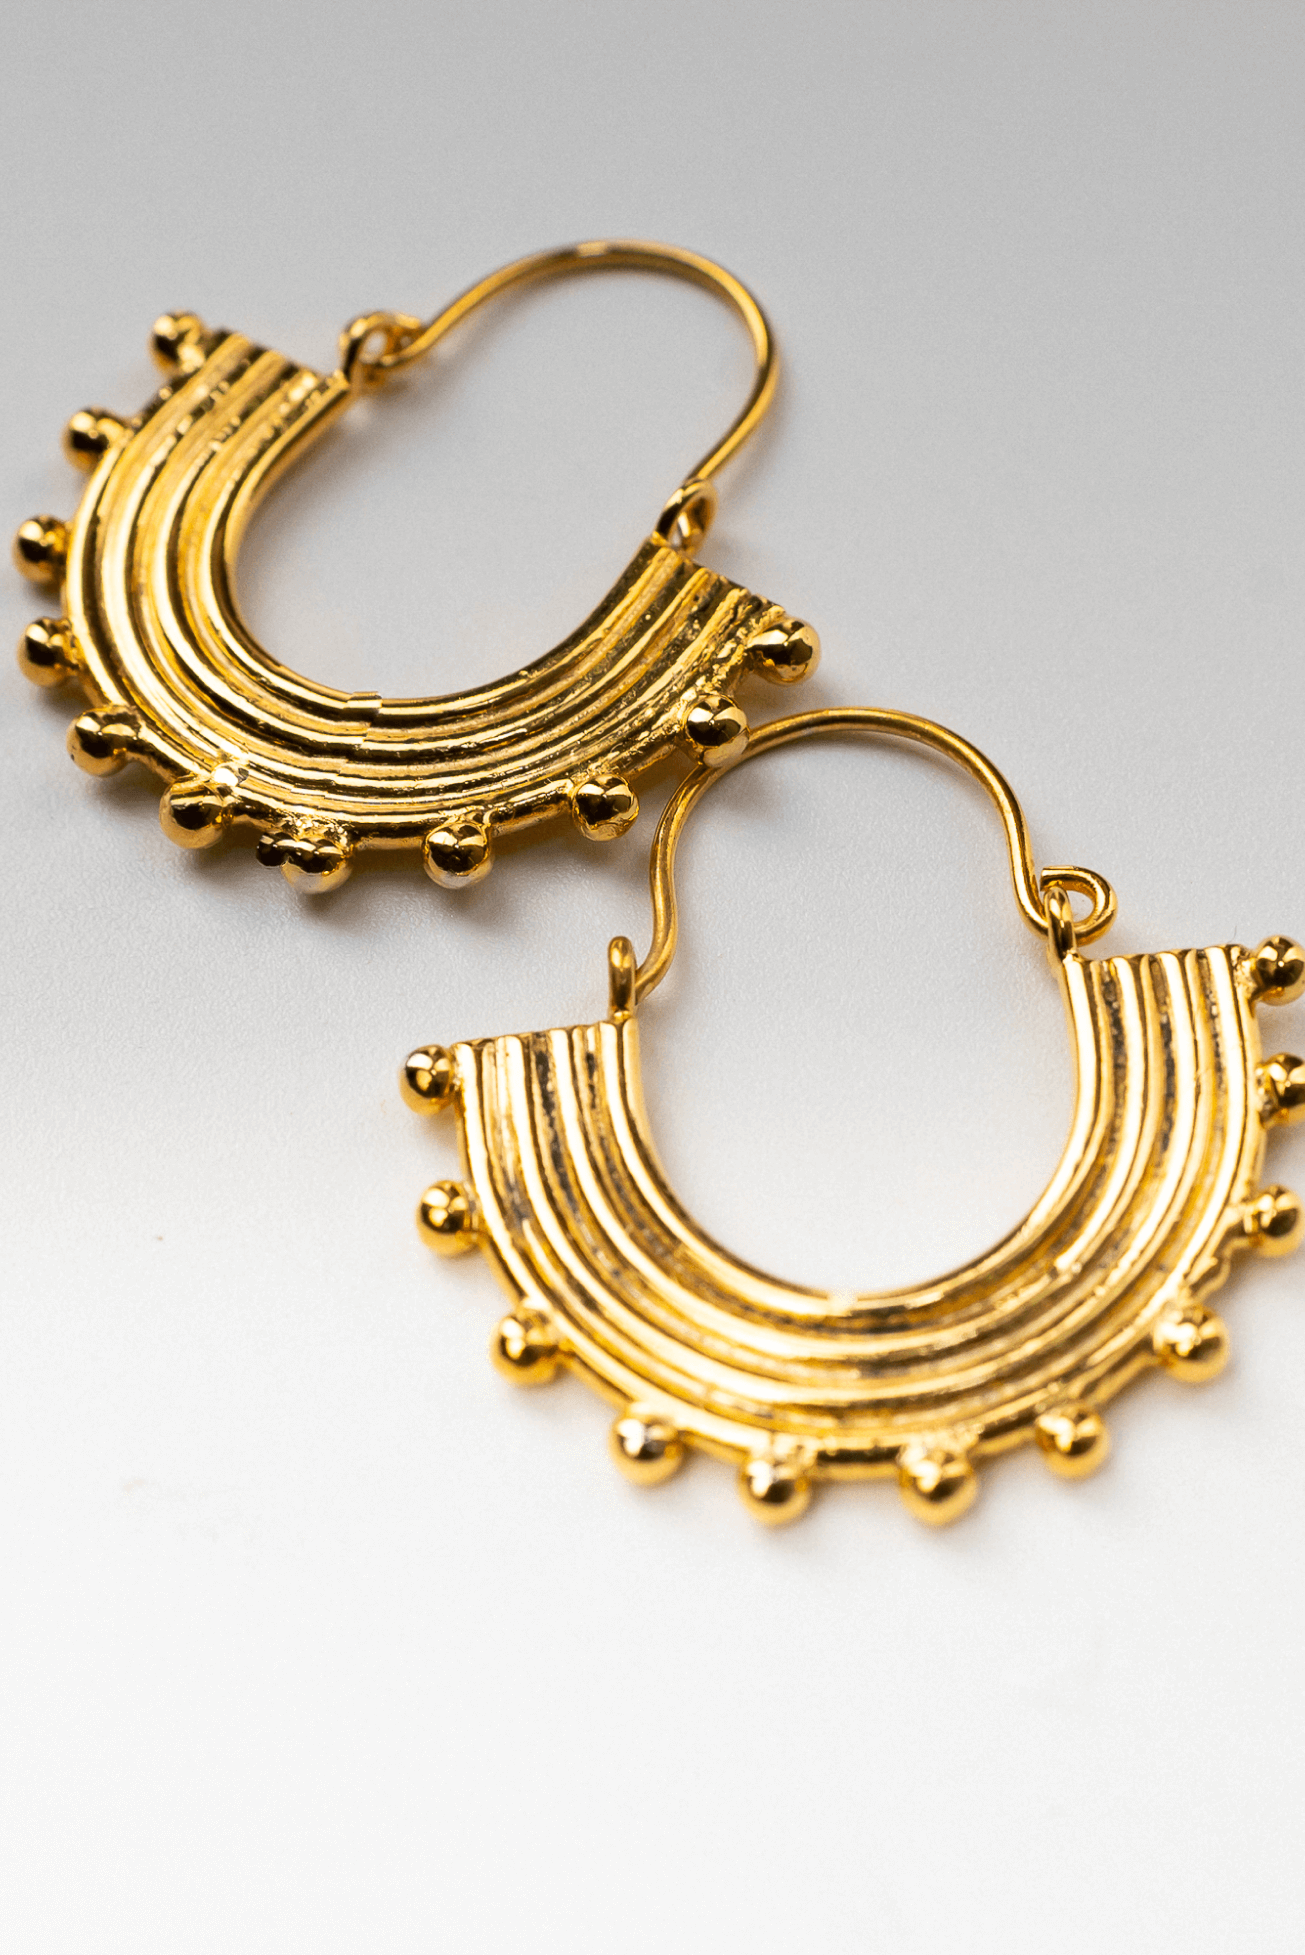 Shop Khalisa Earrings by We Are NBO on Arrai. Discover stylish, affordable clothing, jewelry, handbags and unique handmade pieces from top Kenyan & African fashion brands prioritising sustainability and quality craftsmanship.